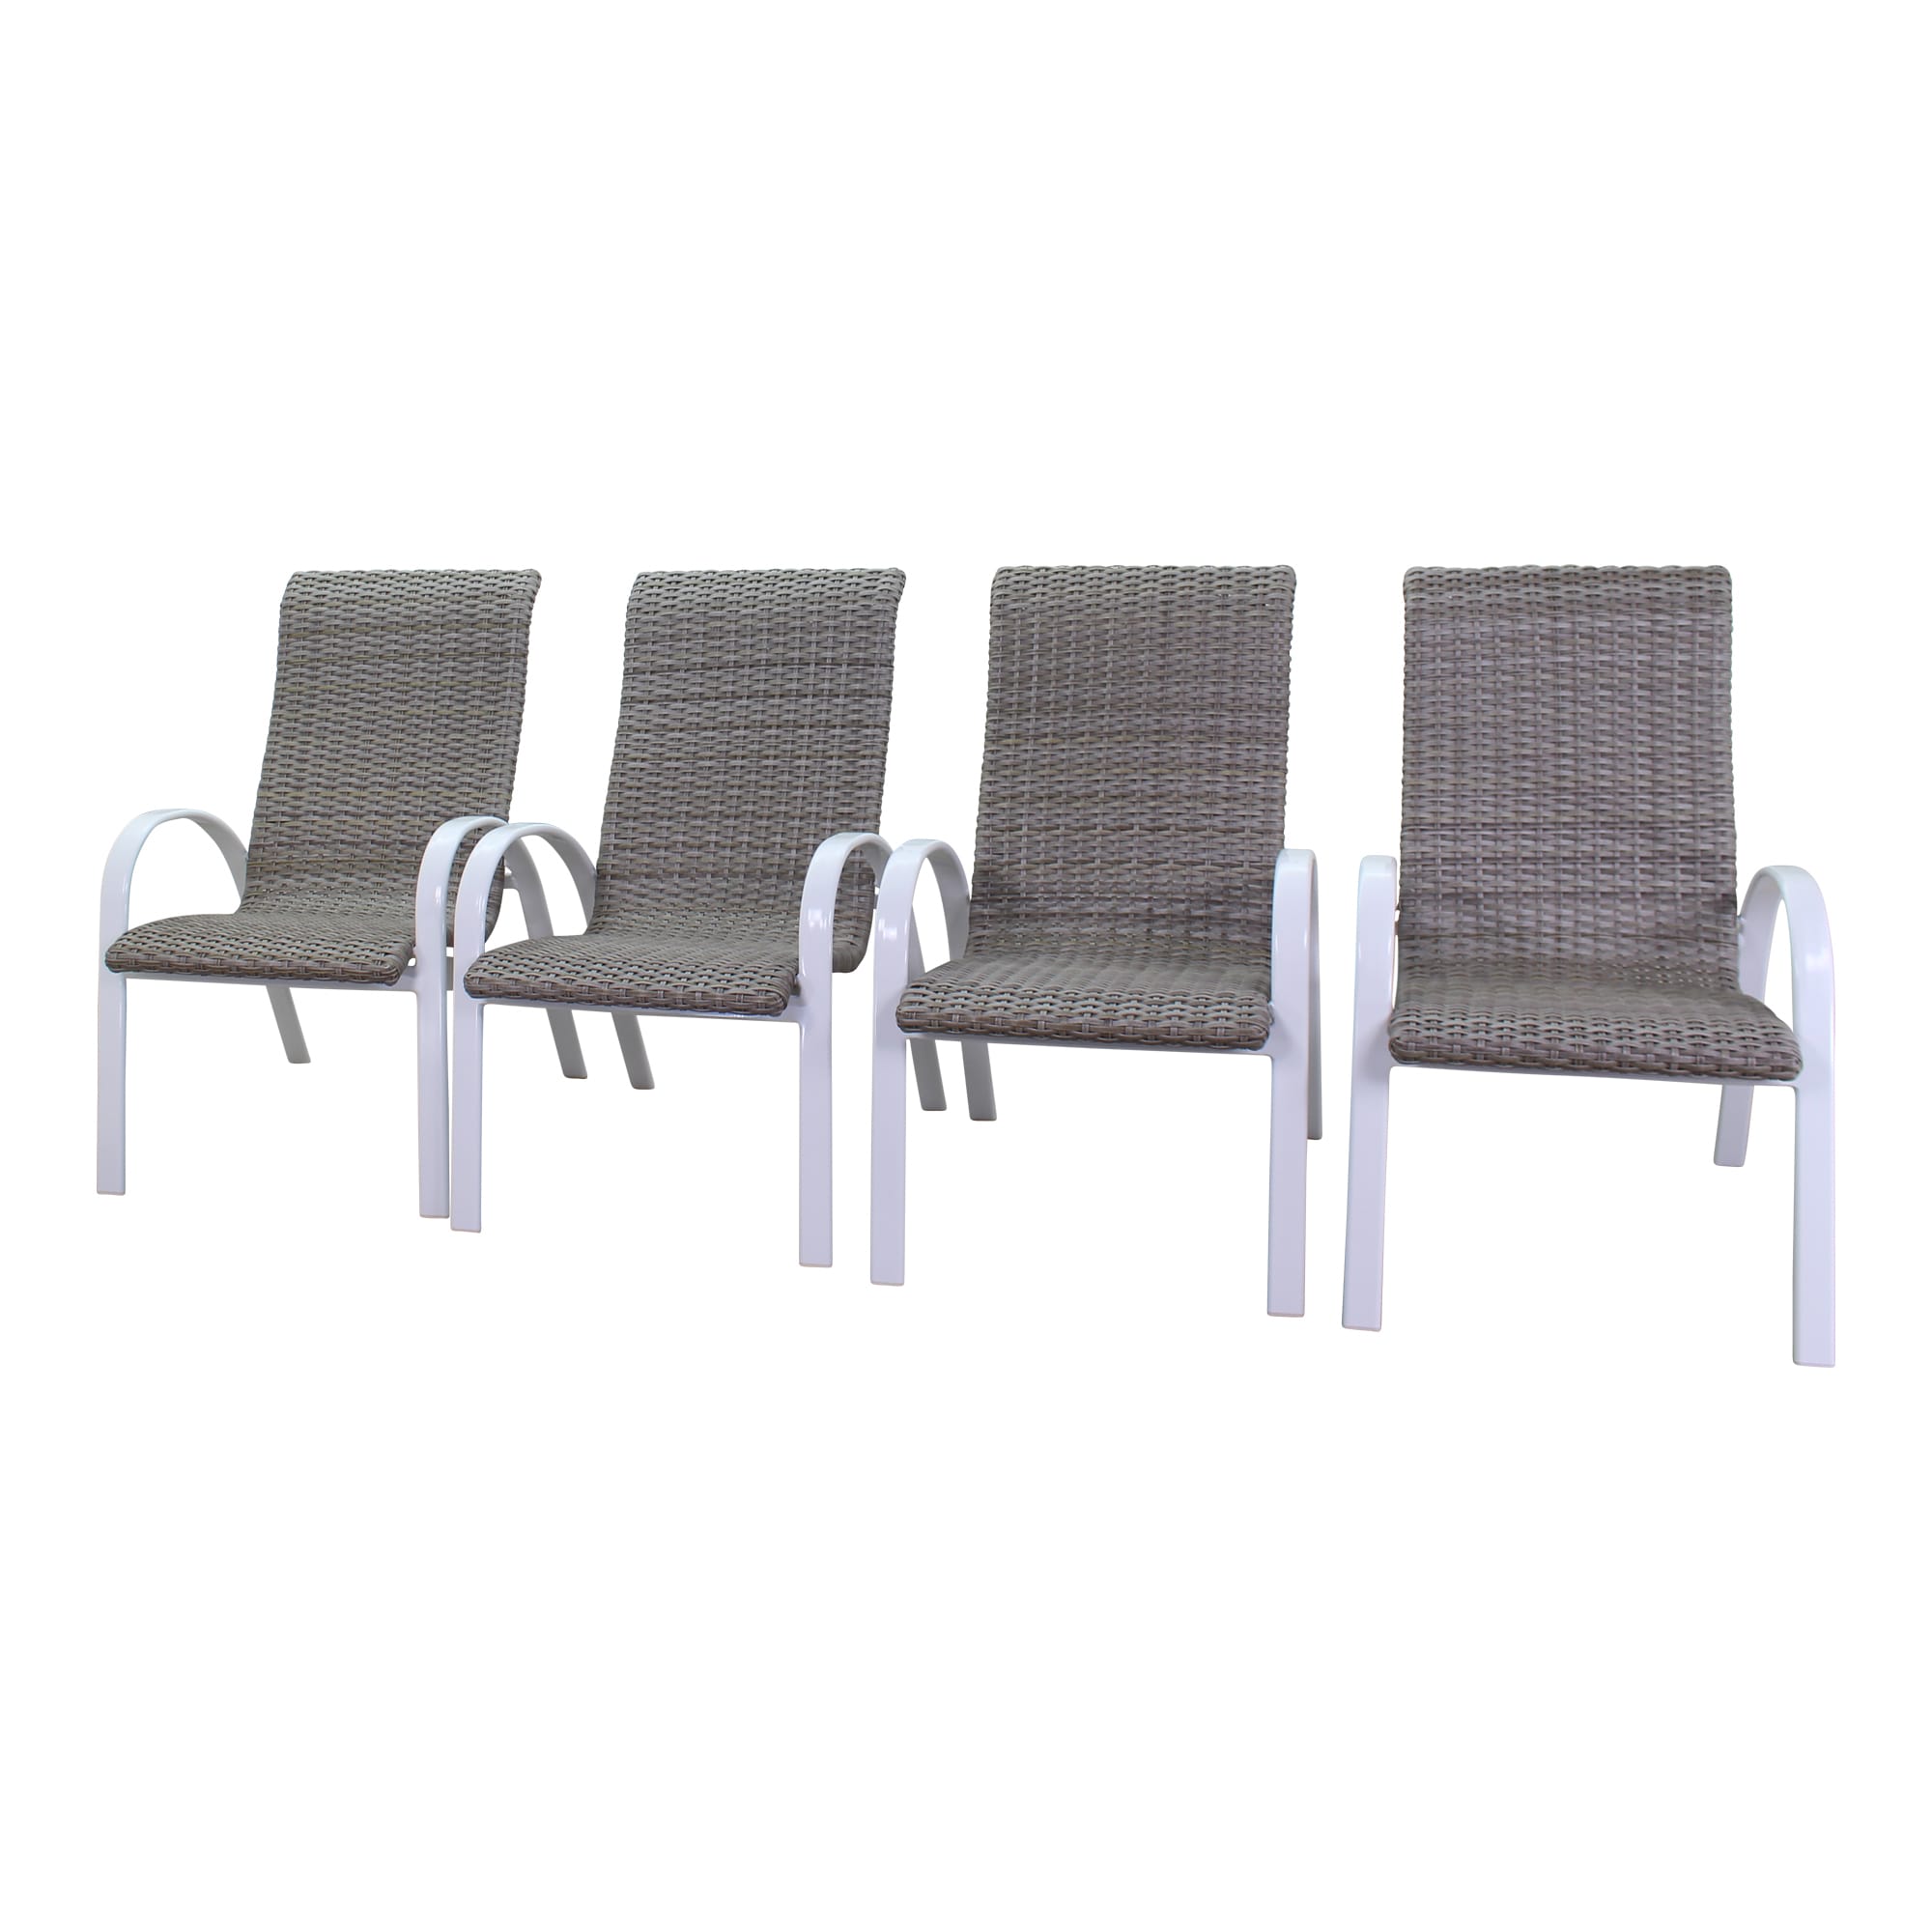 Courtyard Casual Santa Fe Wicker 3 PC Chaise Lounge Set Includes One 20 End Table and Two Chaise Loungers - White